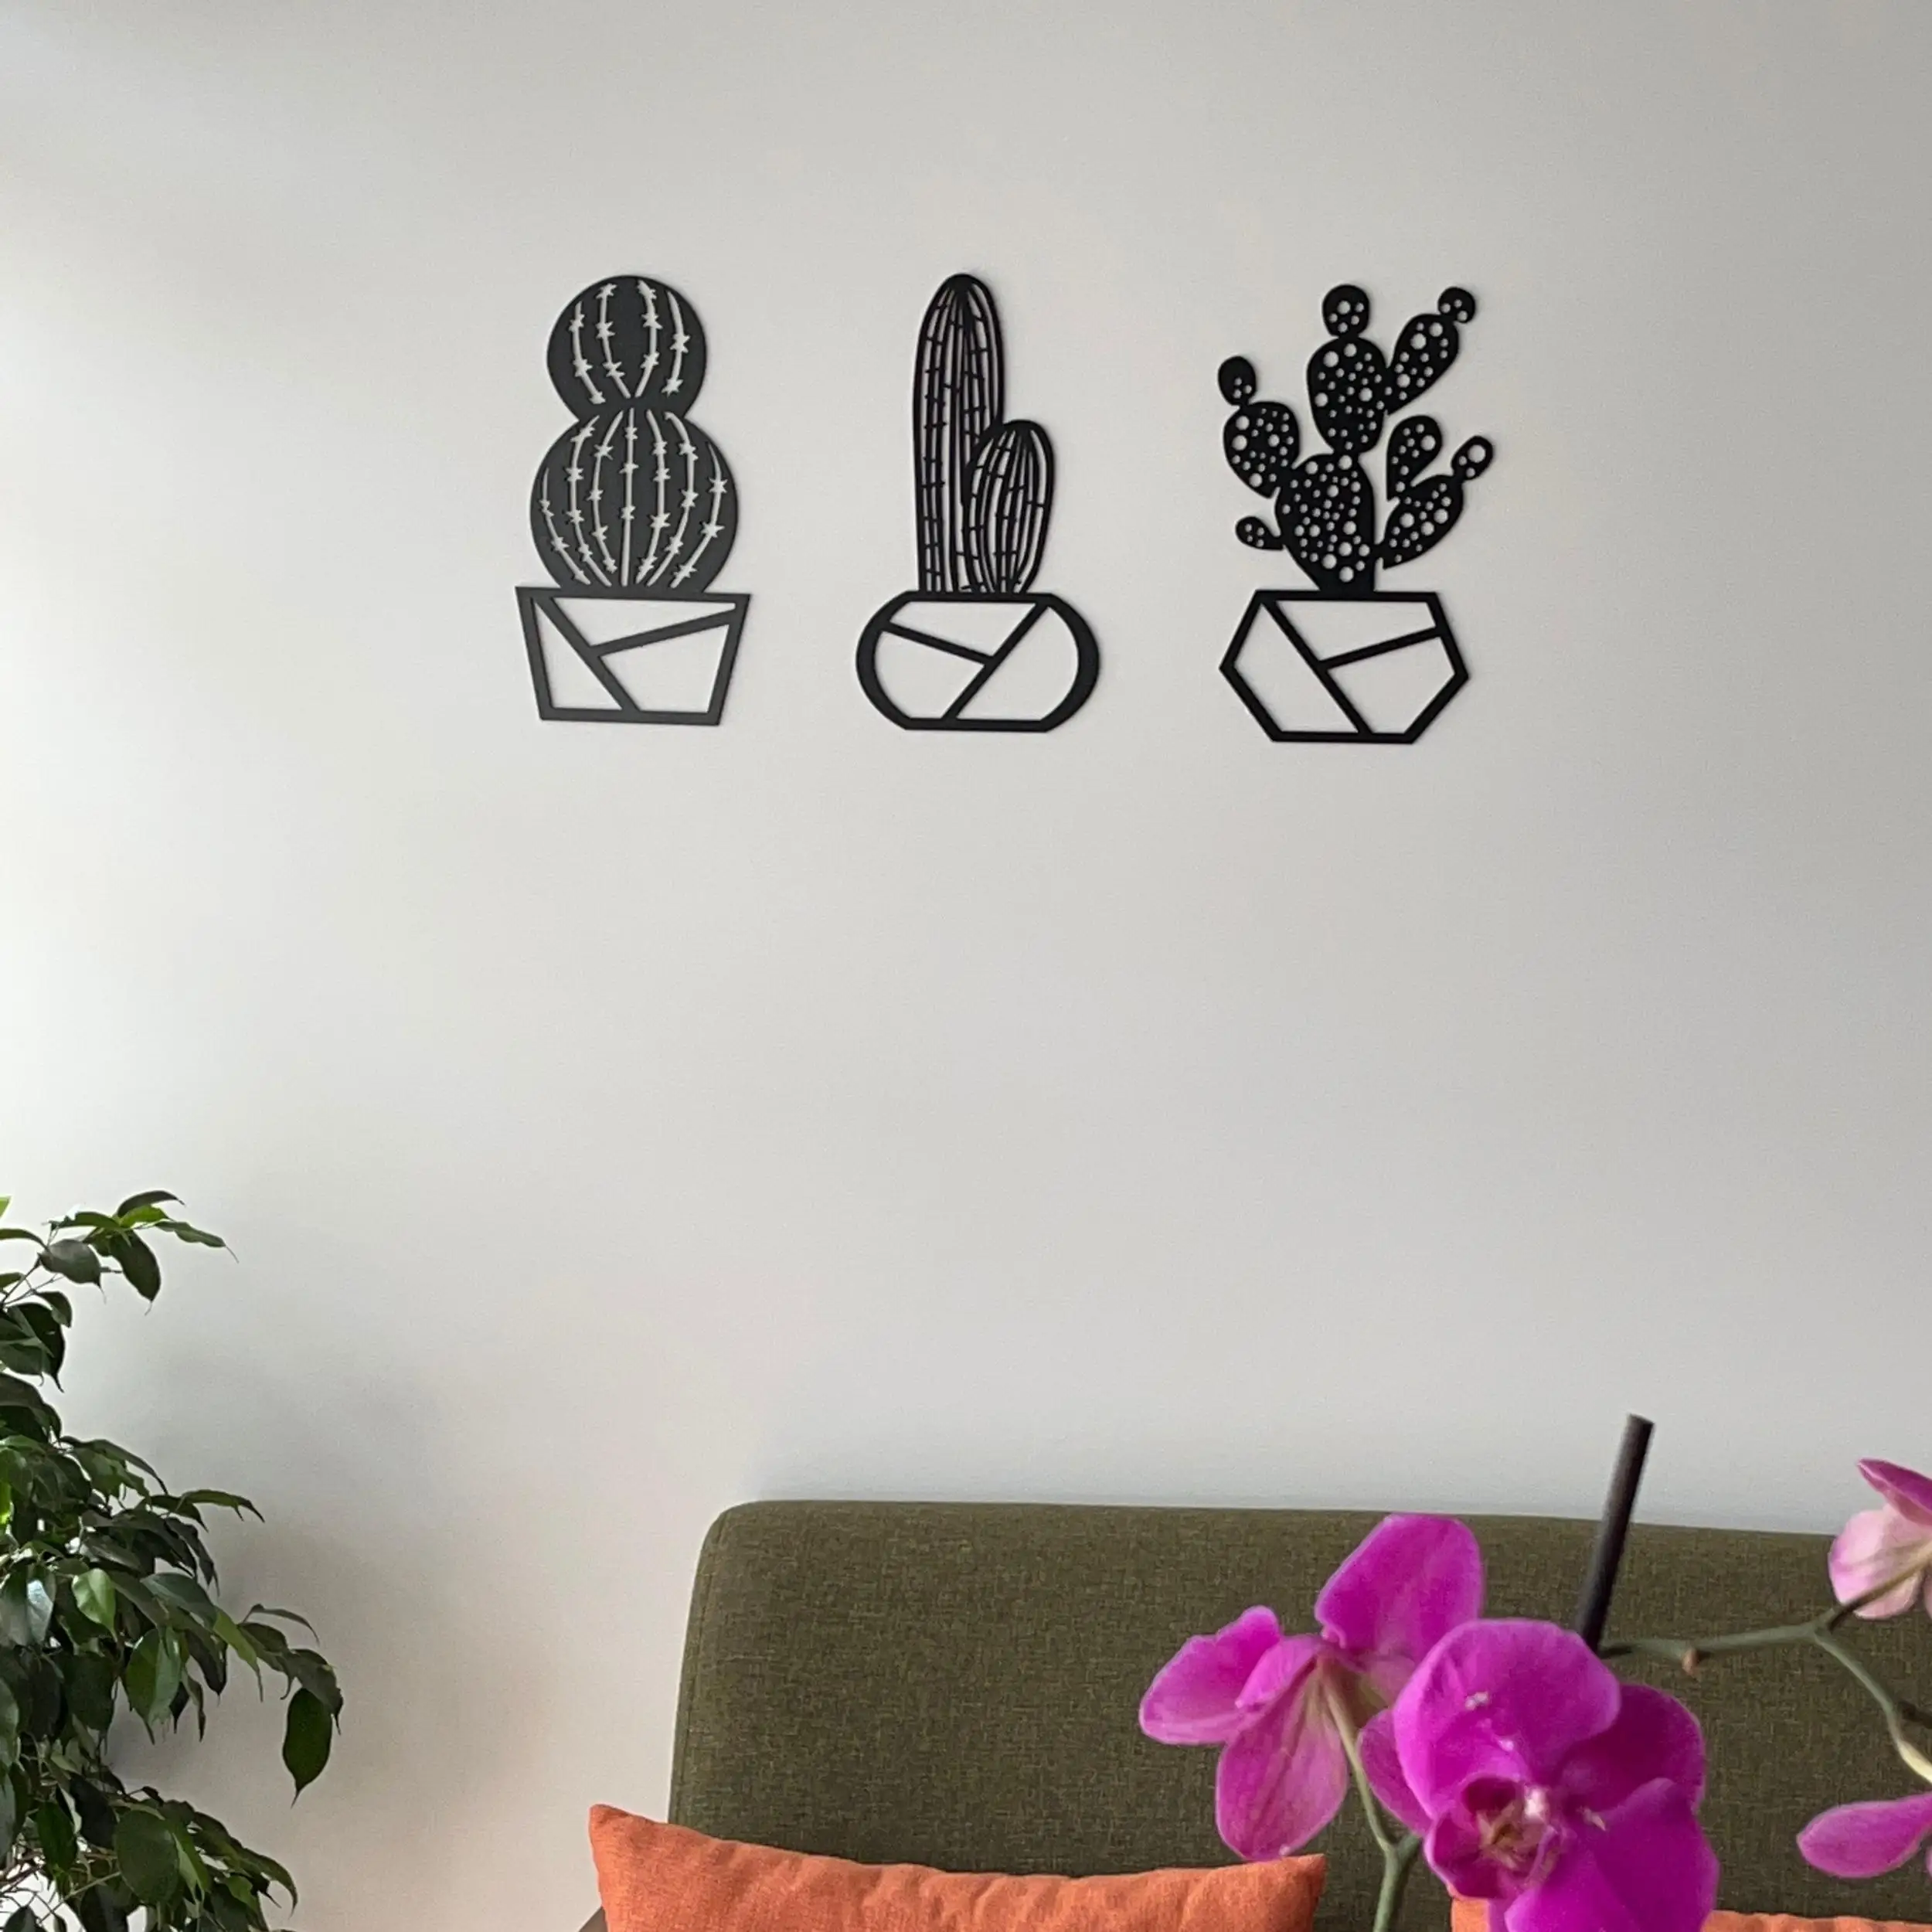 

Set of 3 Cactus Plant Wood Wall Decoration Black Color Laser Cut Modern Nature Home Office New 3D Creative Stylish Living Room Kitchen Decorative New 2021 Modern Quality Gift Ornament Beautiful Cute Painting Art MDF